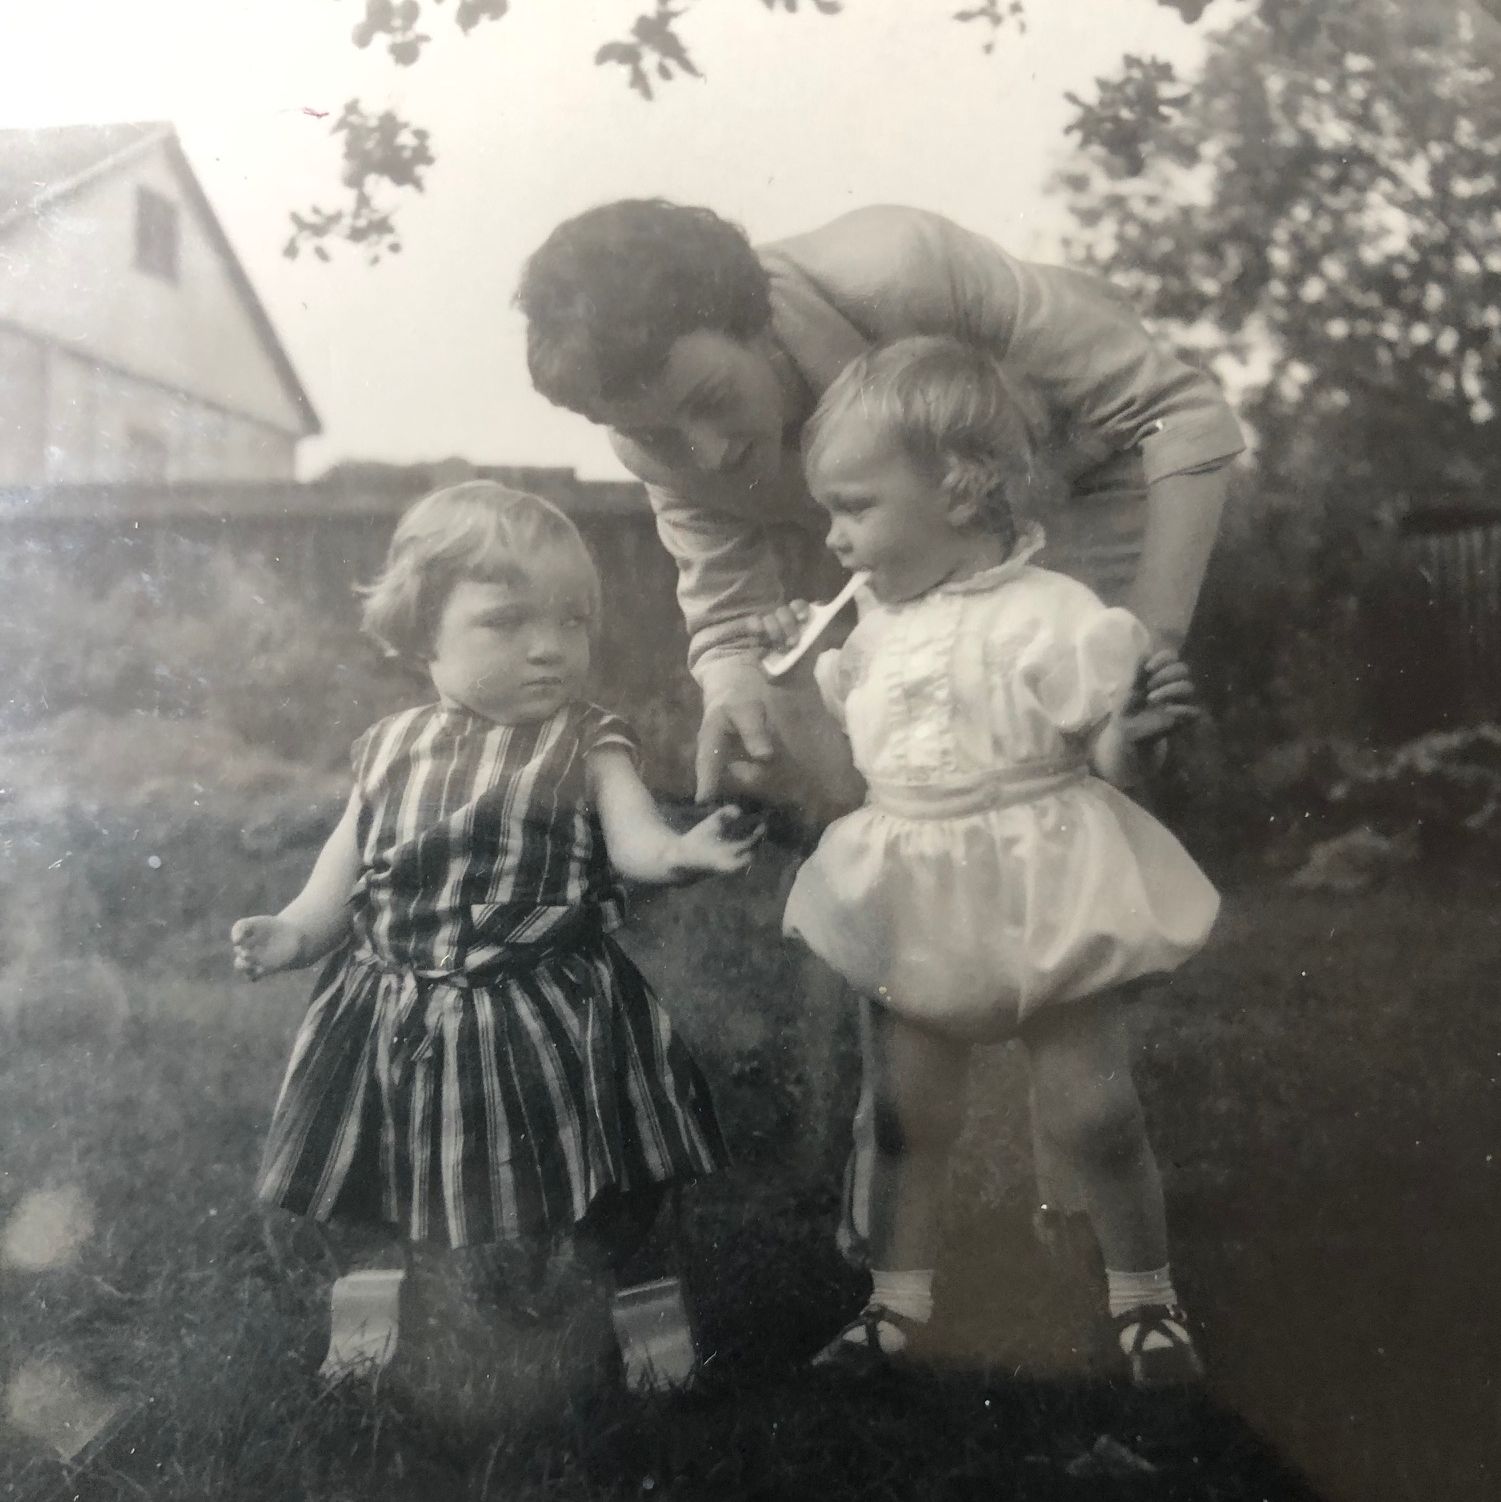 Teresa Smith from Southport is celebrating her 60th birthday. She is pictured with her sister Annette and her Mum.